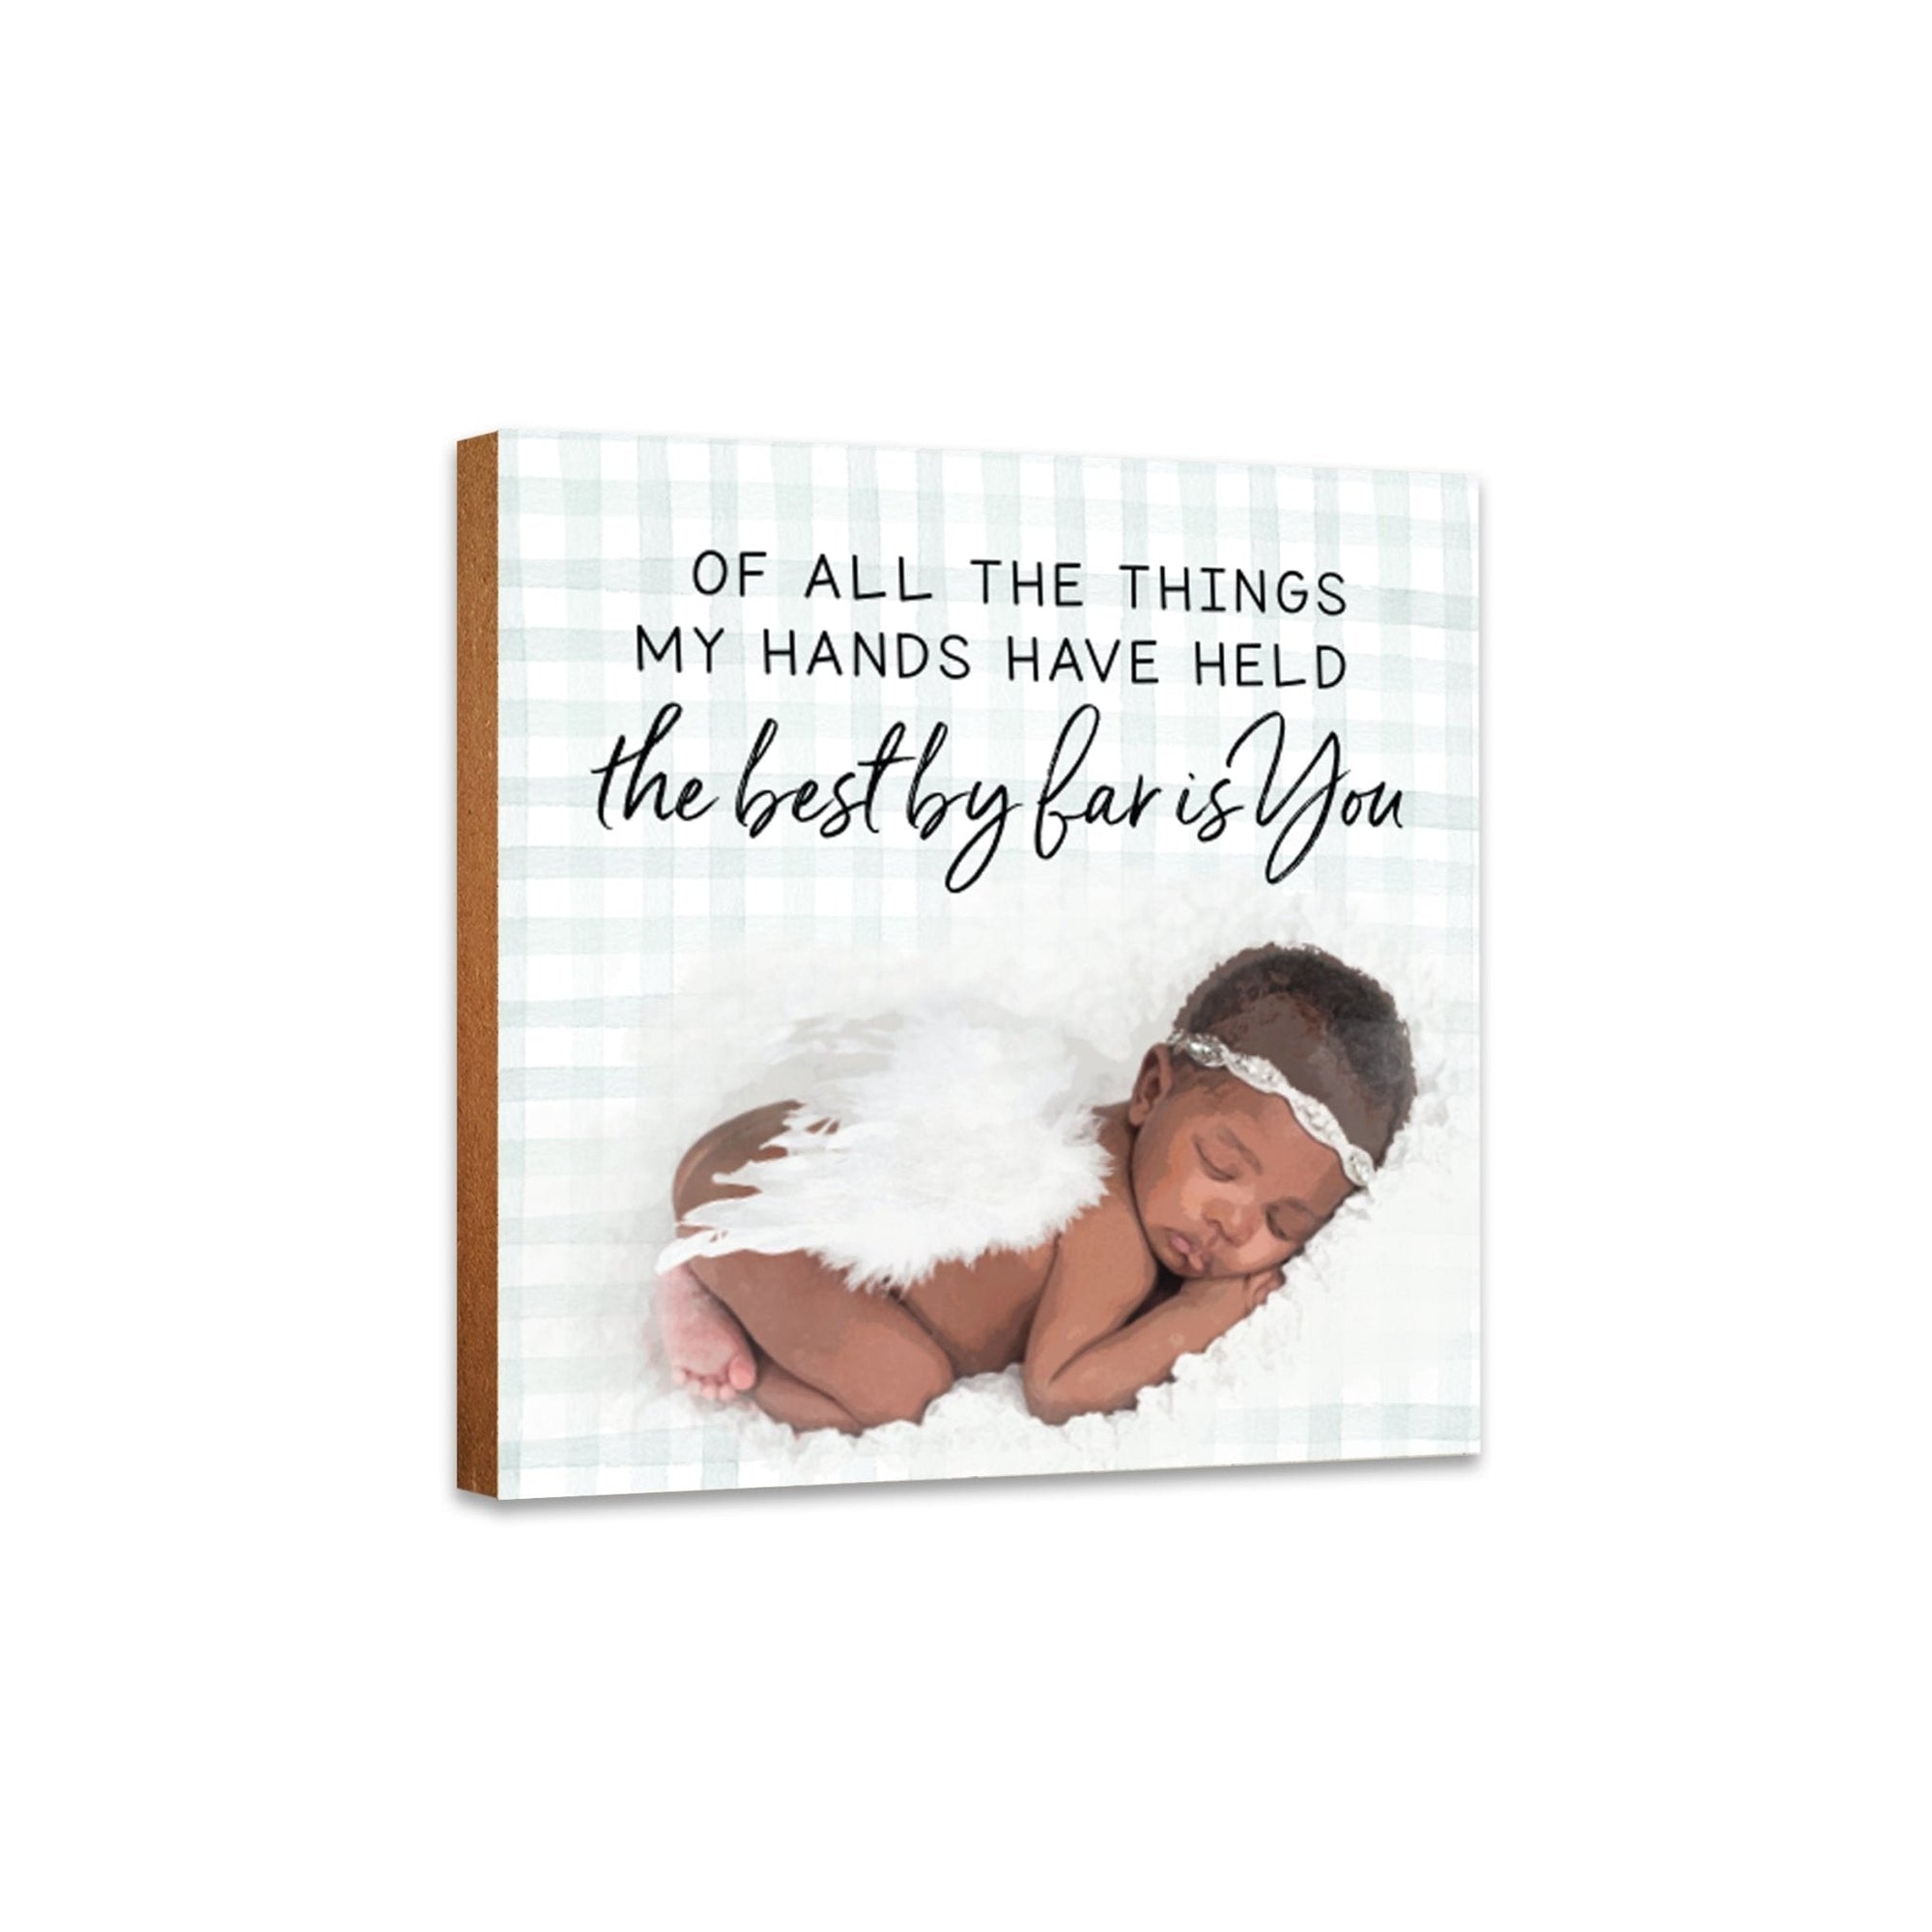 Inspirational Praying Kids Tabletop Decor - Perfect tabletop decoration for kids, ideal for a serene ambiance in any room.